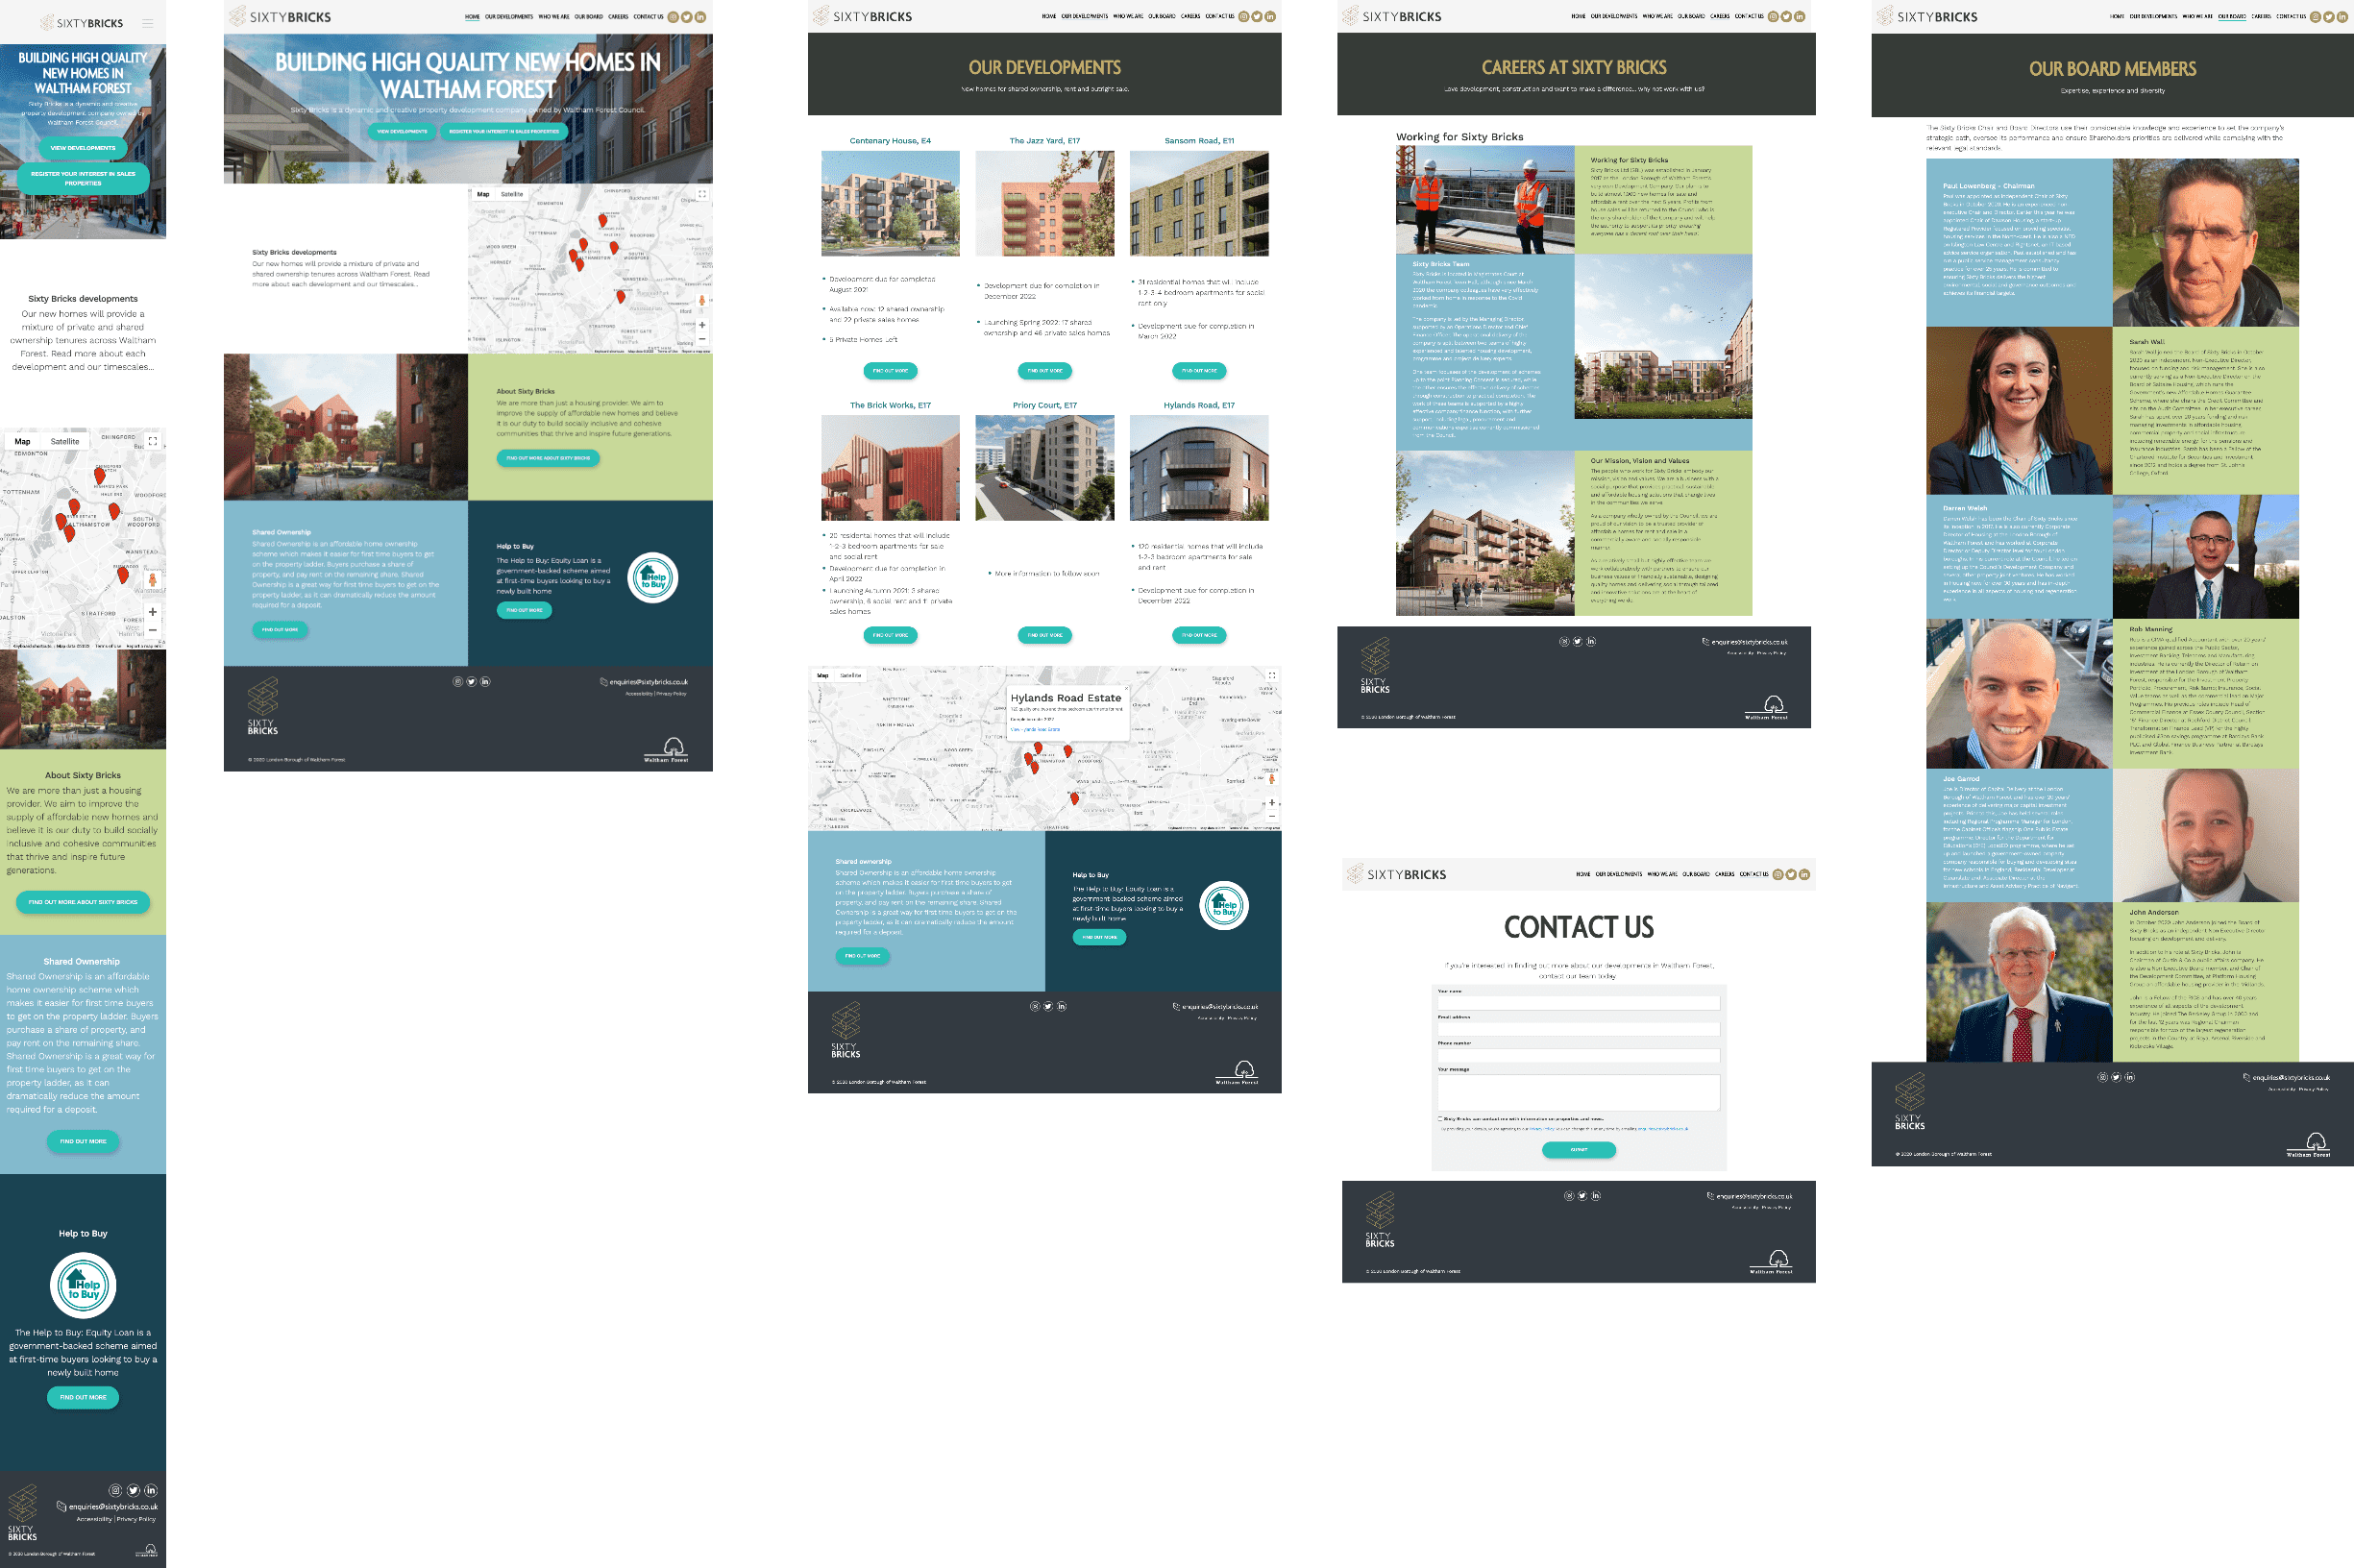 A microsite from Waltham Forest Council